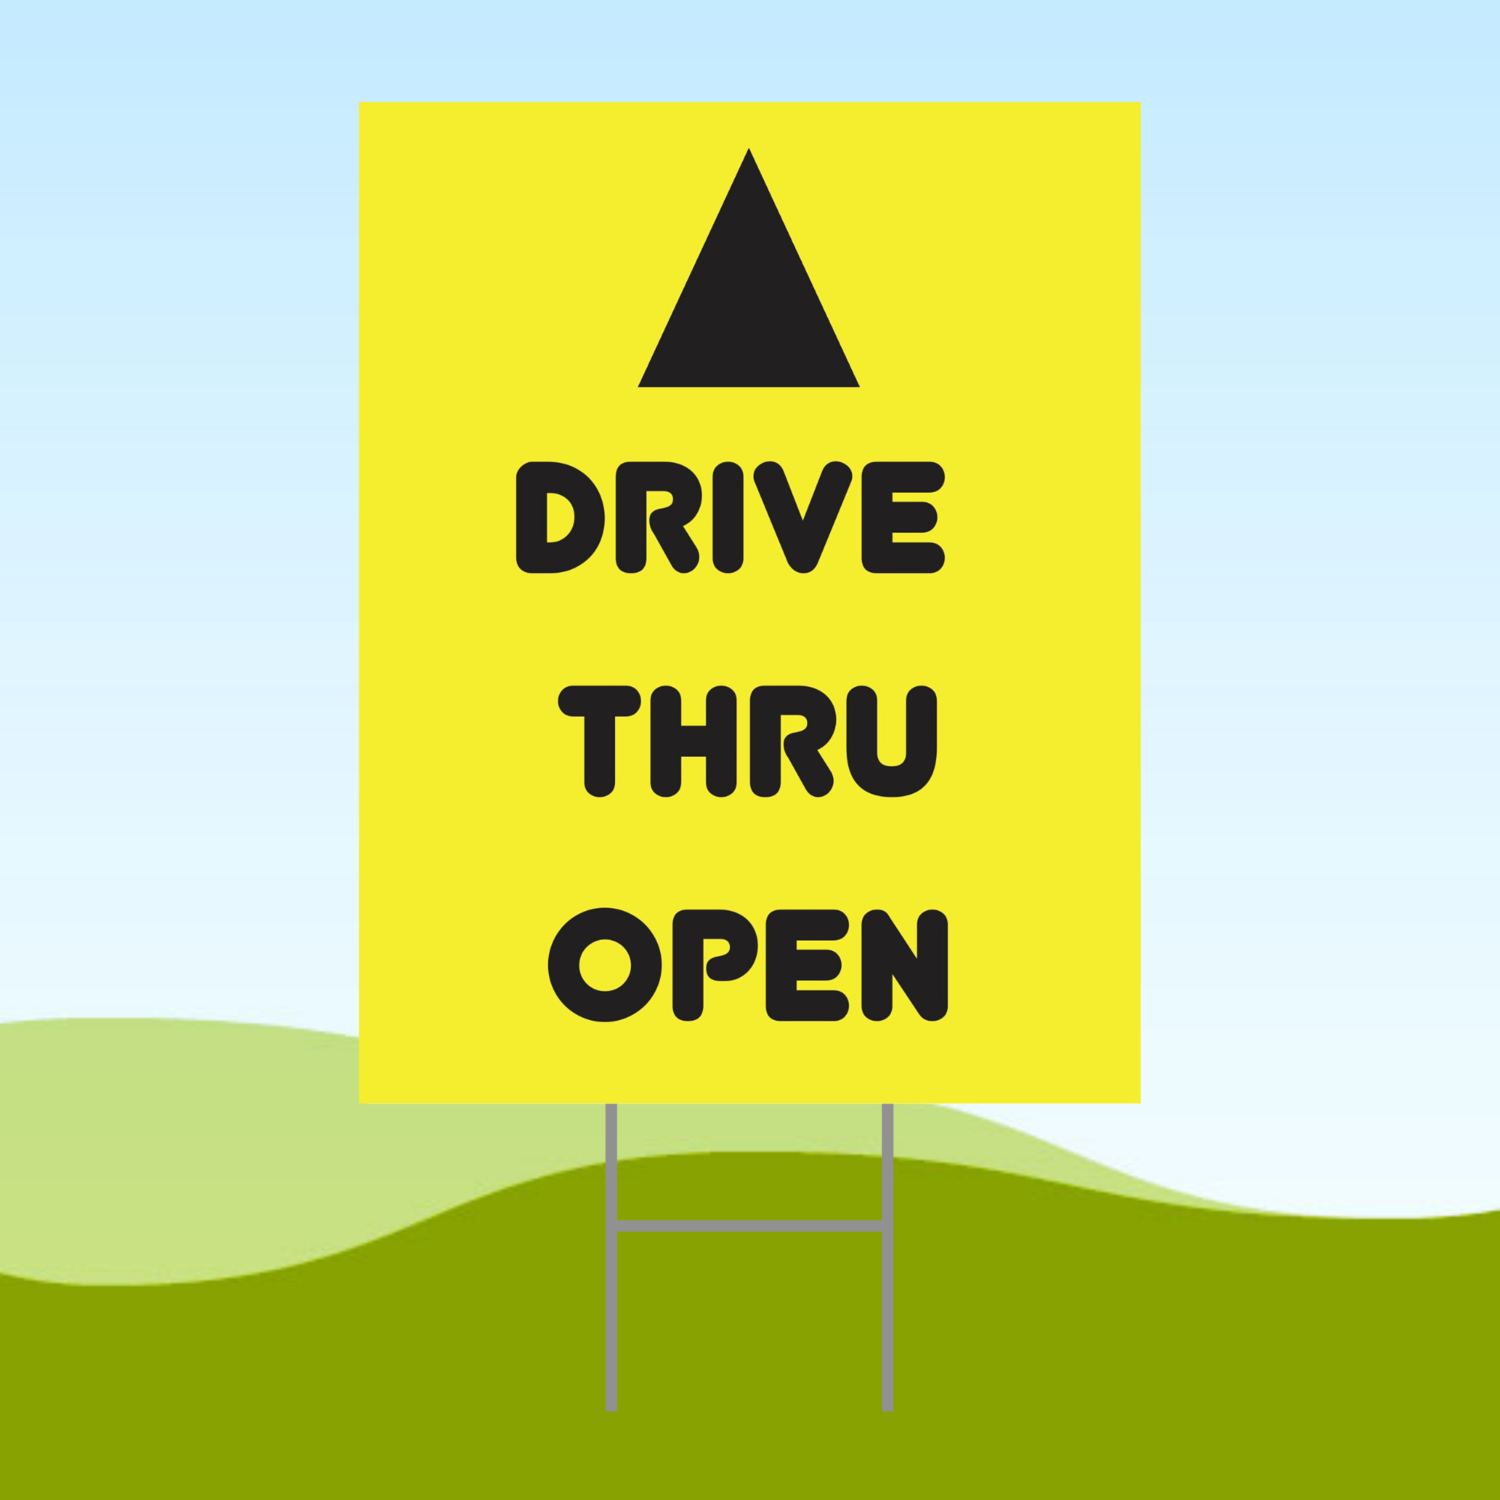 Drive Thru Open Arrow Yellow 18x24 Yard Sign WITH STAKE Corrugated Plastic Bandit